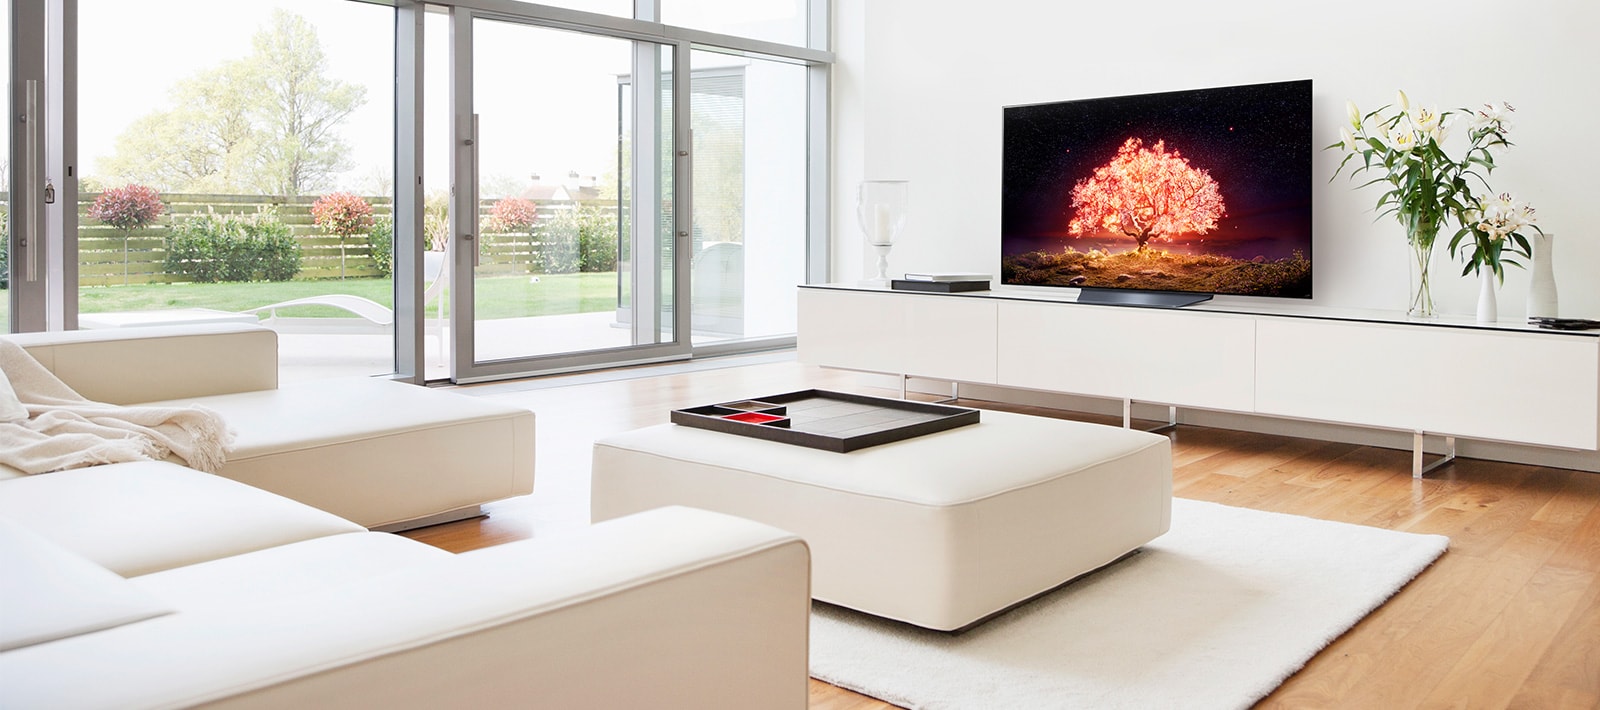 A TV showing a tree emitting red light in a white and simple house setting